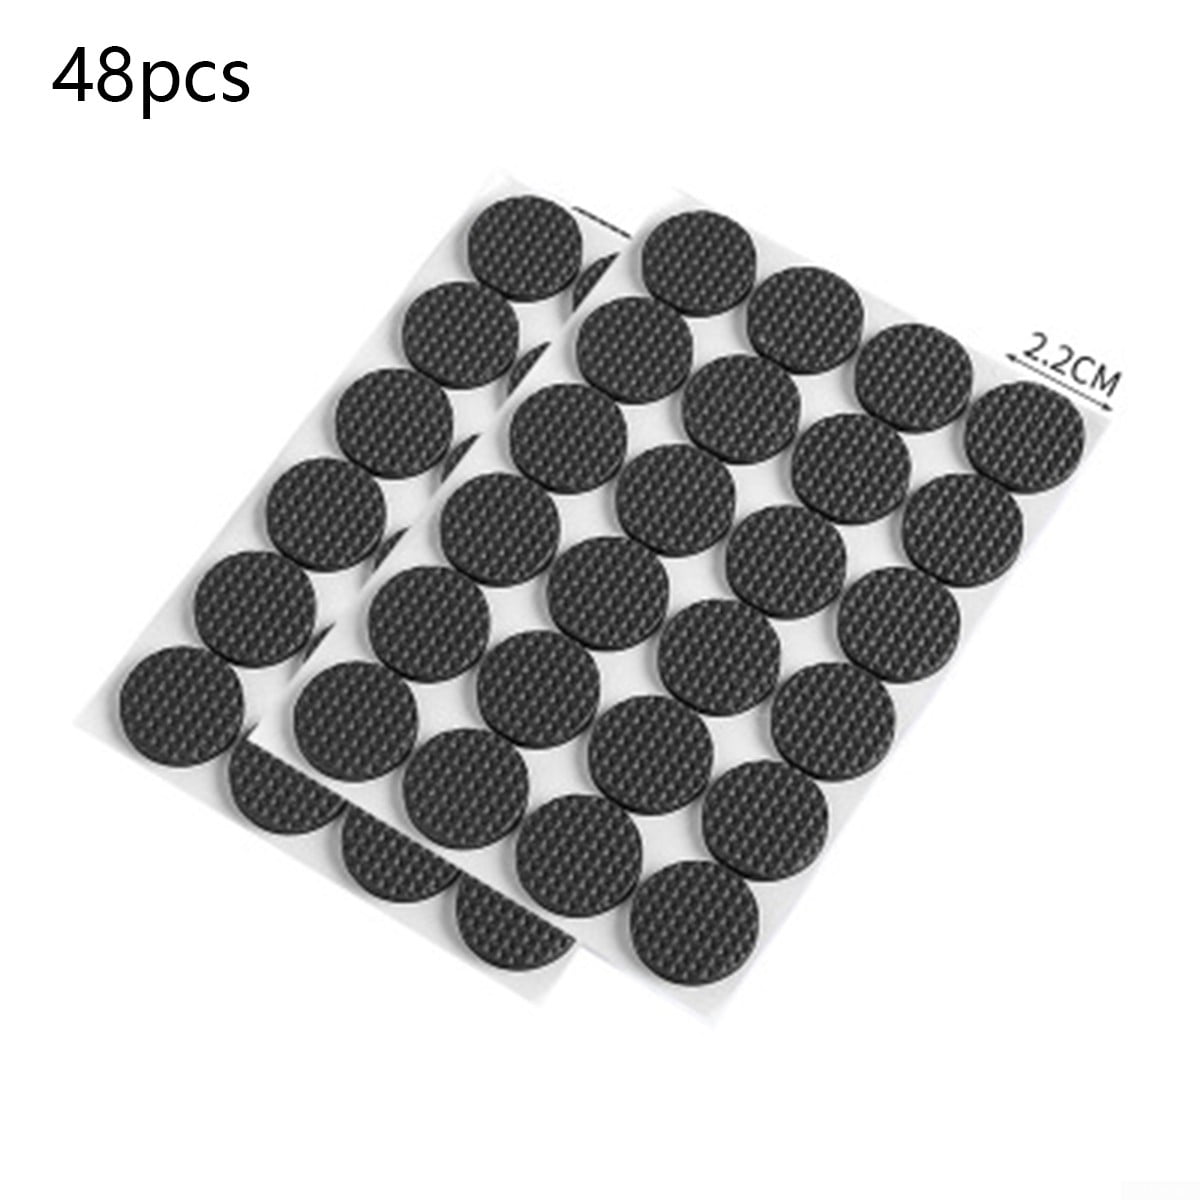 Details about   Self Adhesive Floor Protectors Chair Leg Pads Table EVA Pad Feet Anti Scratch 